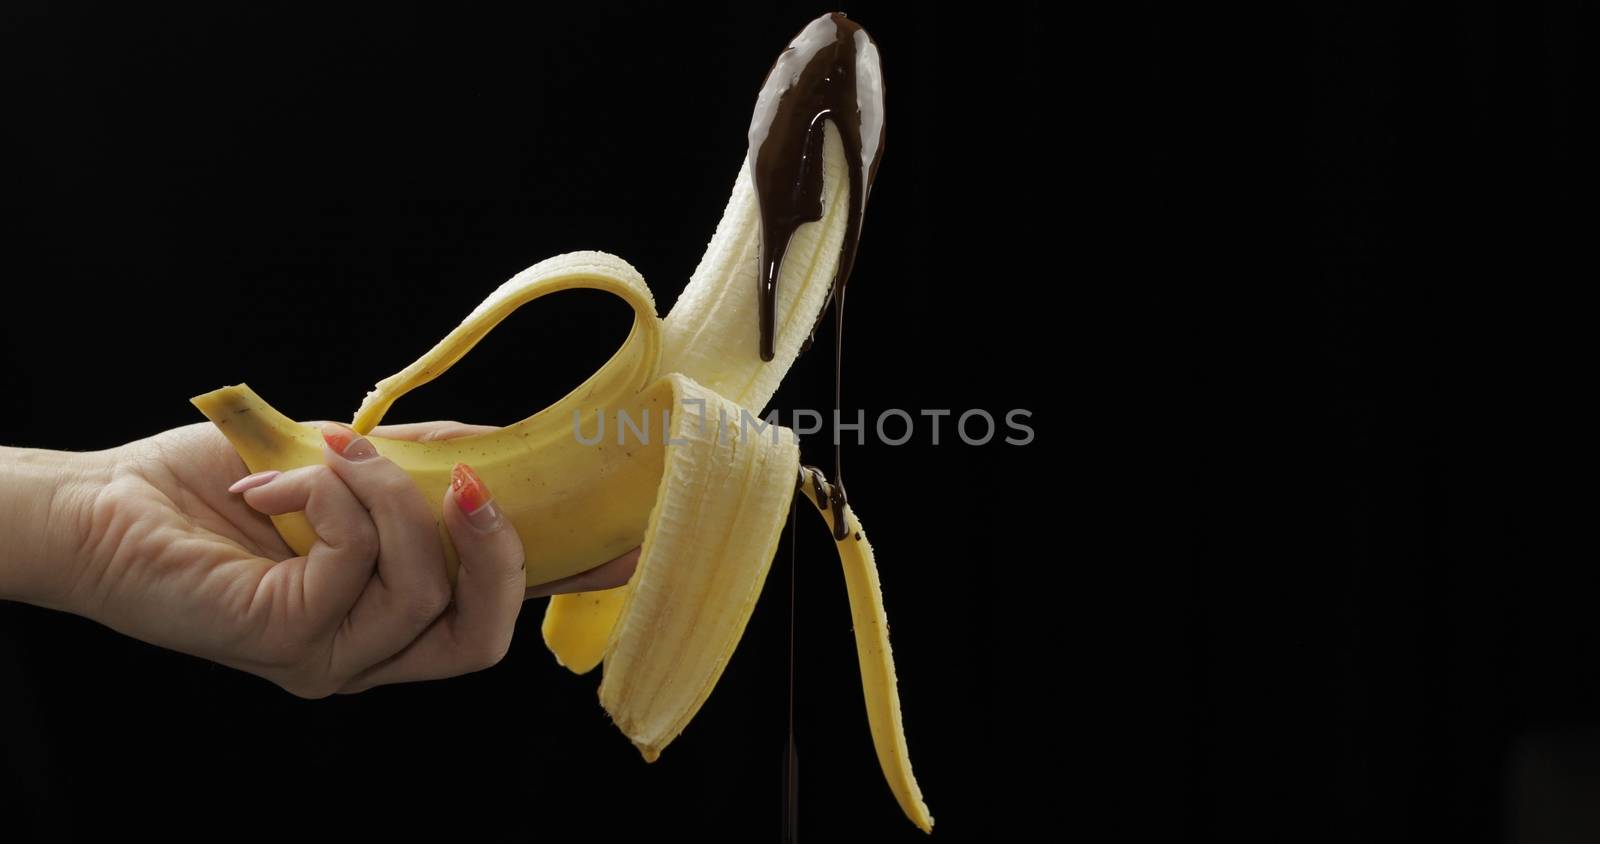 Banana with melted dark chocolate syrup. A peeled banana gets covered in chocolate cream. Black background